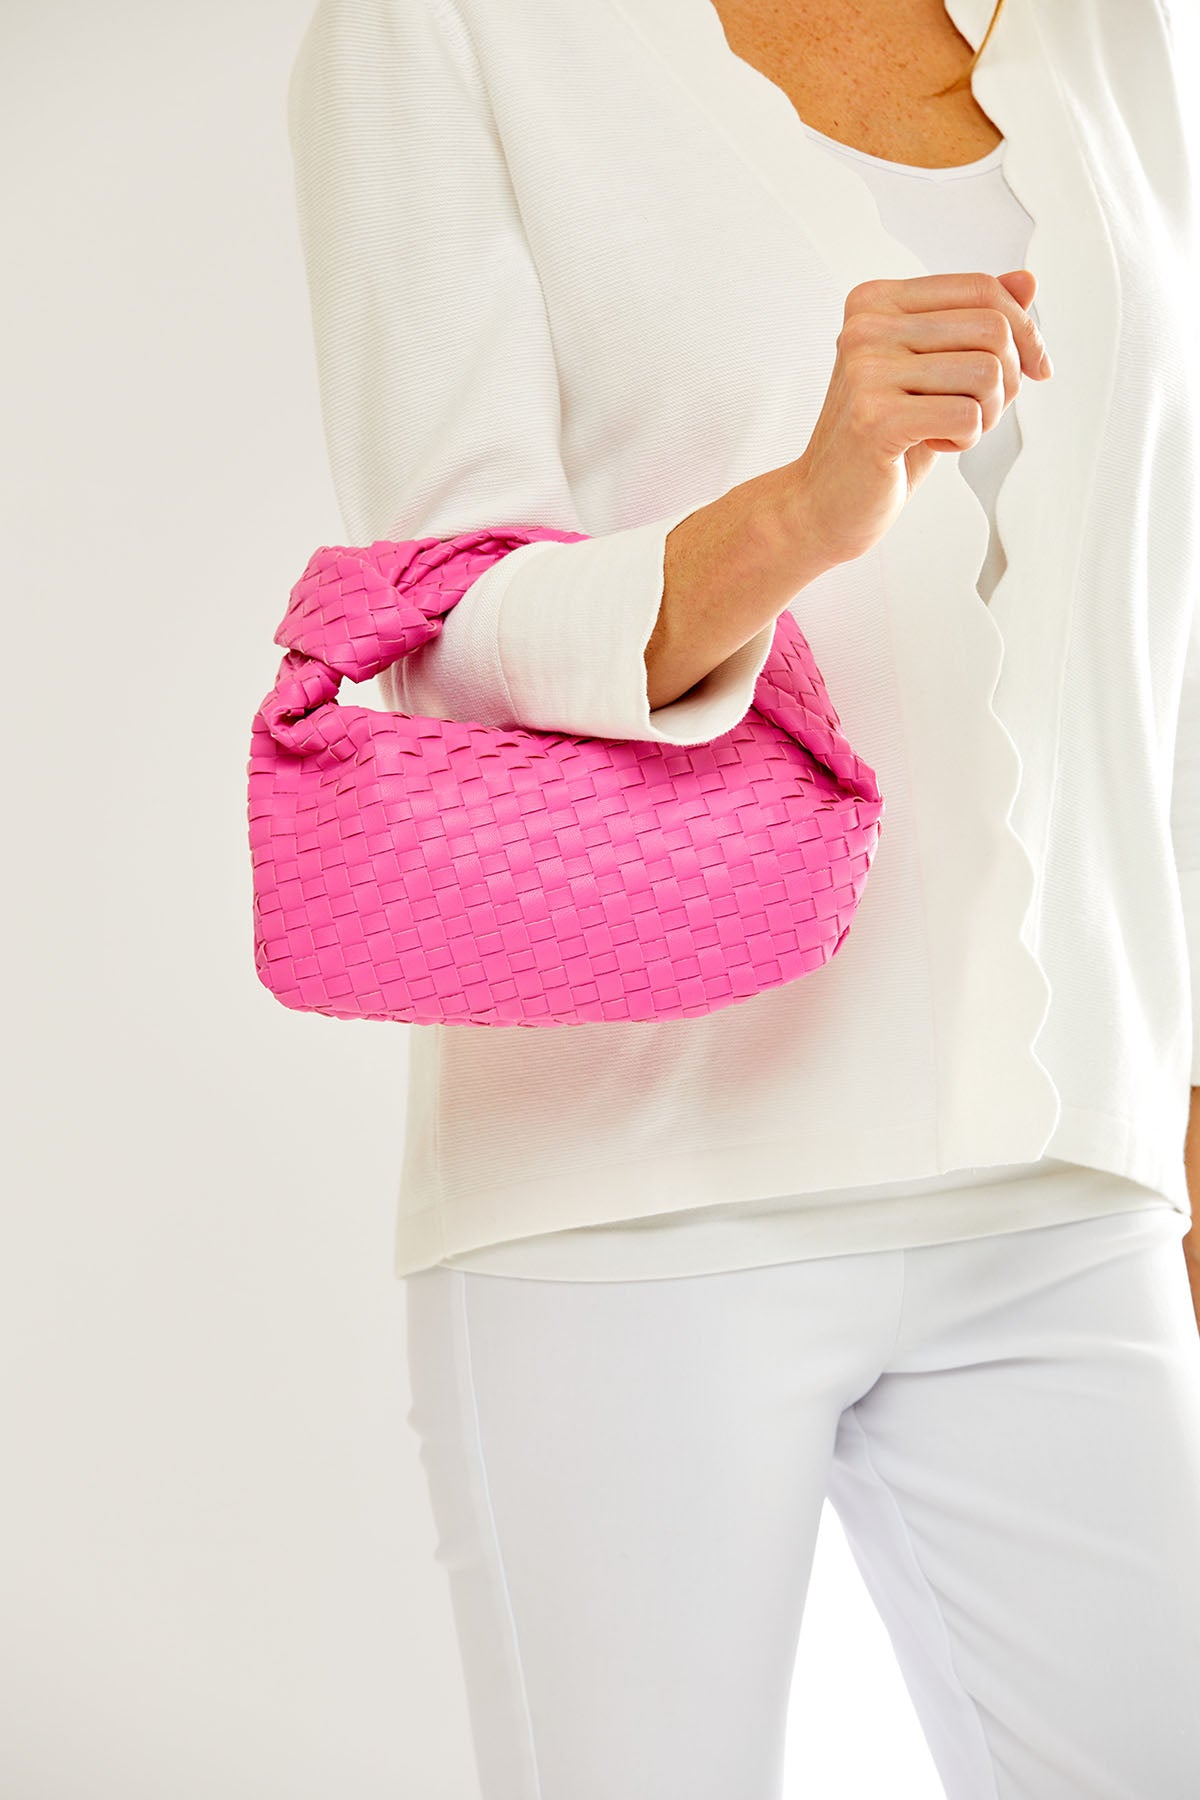 Woman holding a pink bag